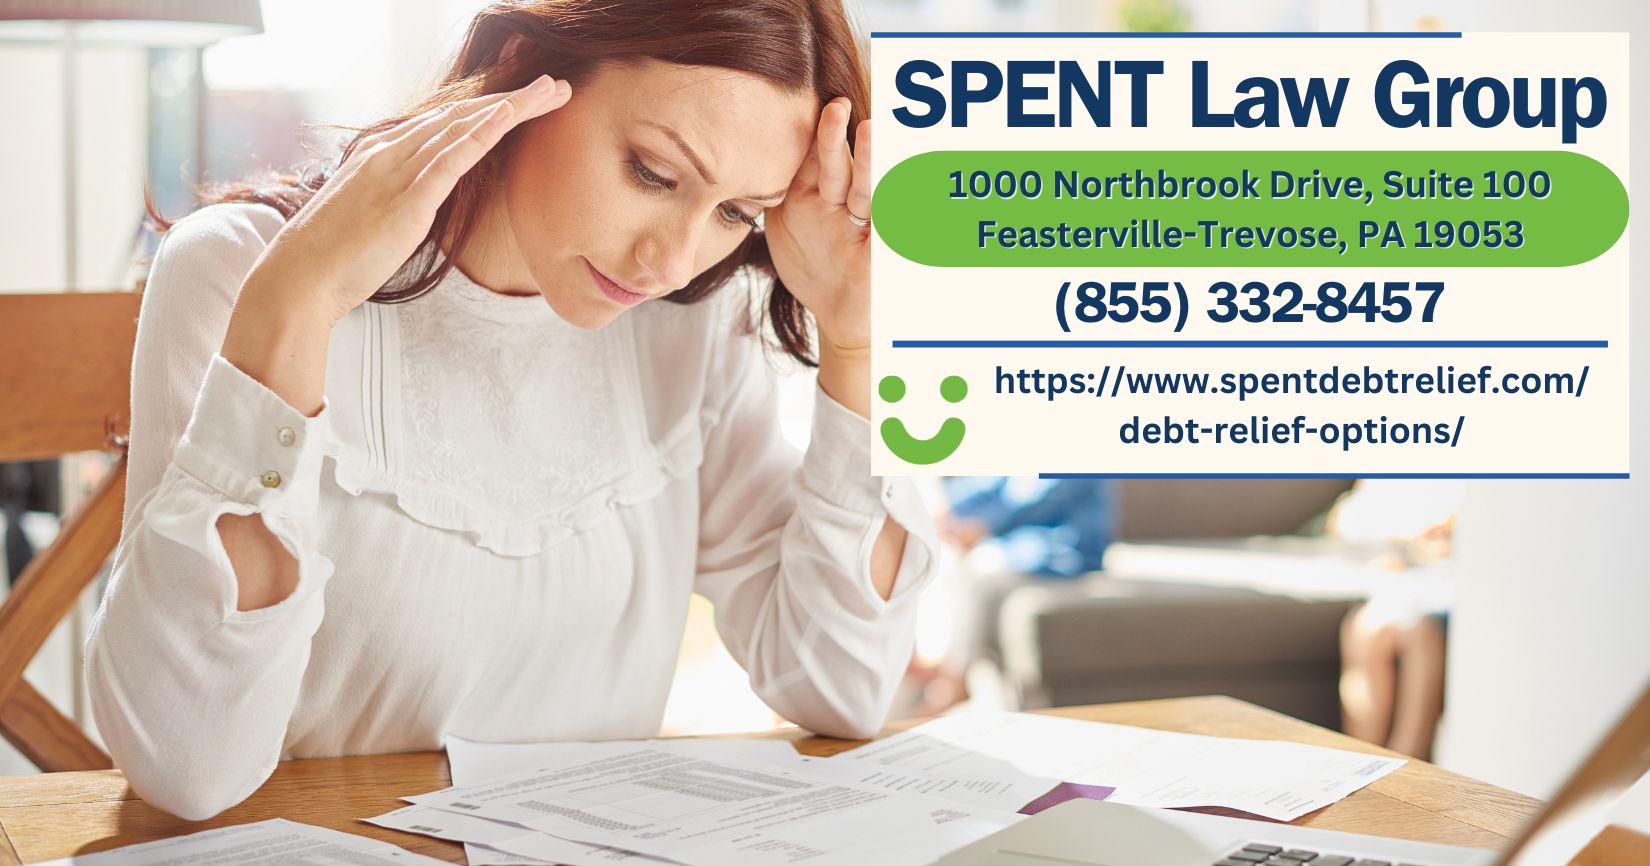 SPENT Law Group’s Debt Settlement Attorneys Release Comprehensive Guide on Debt Relief Options